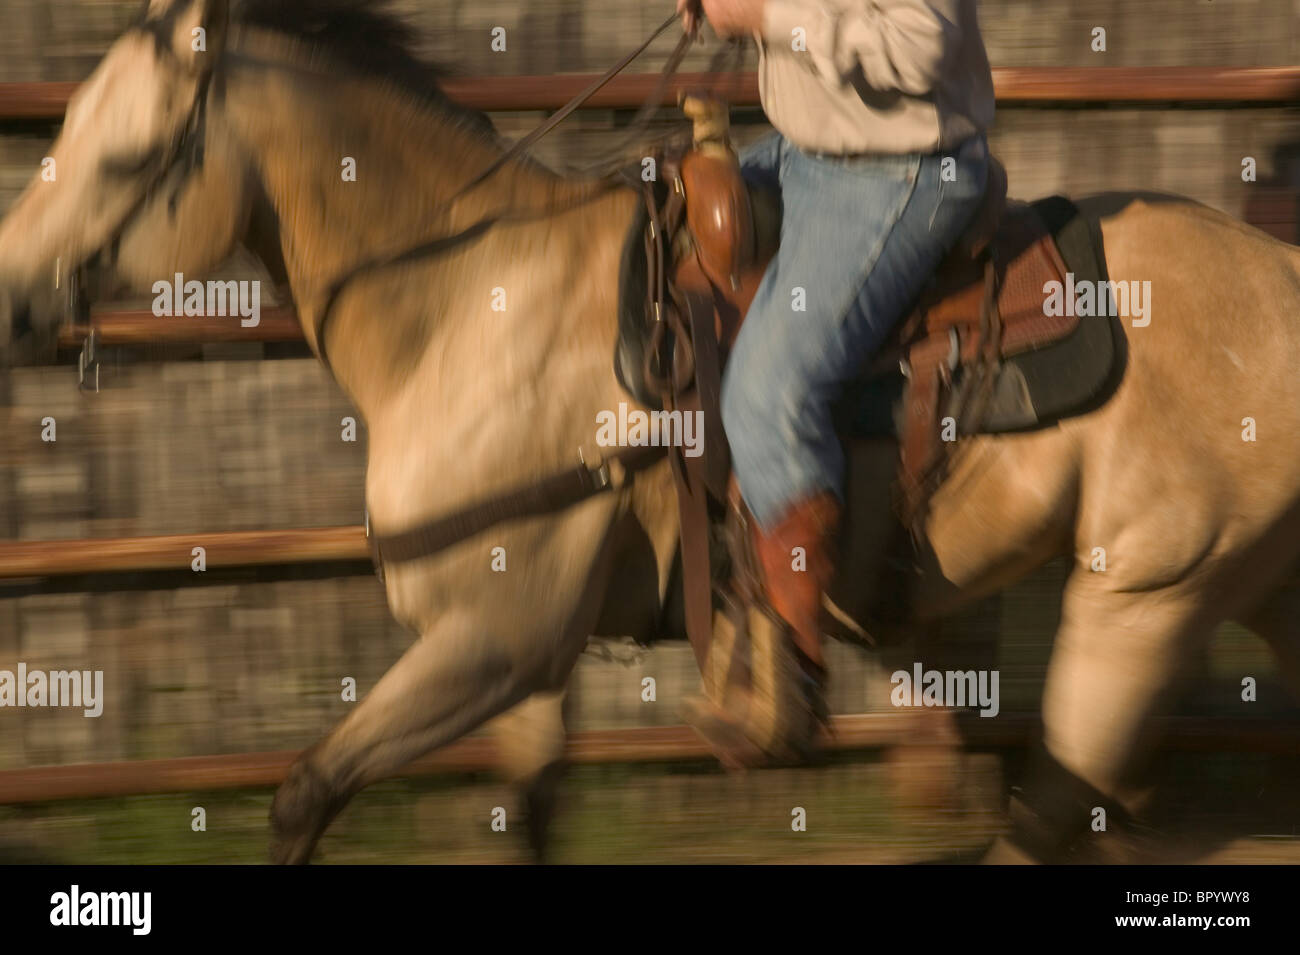 A Texan cowboy takes his horse out for a ride on the ranch. Stock Photo